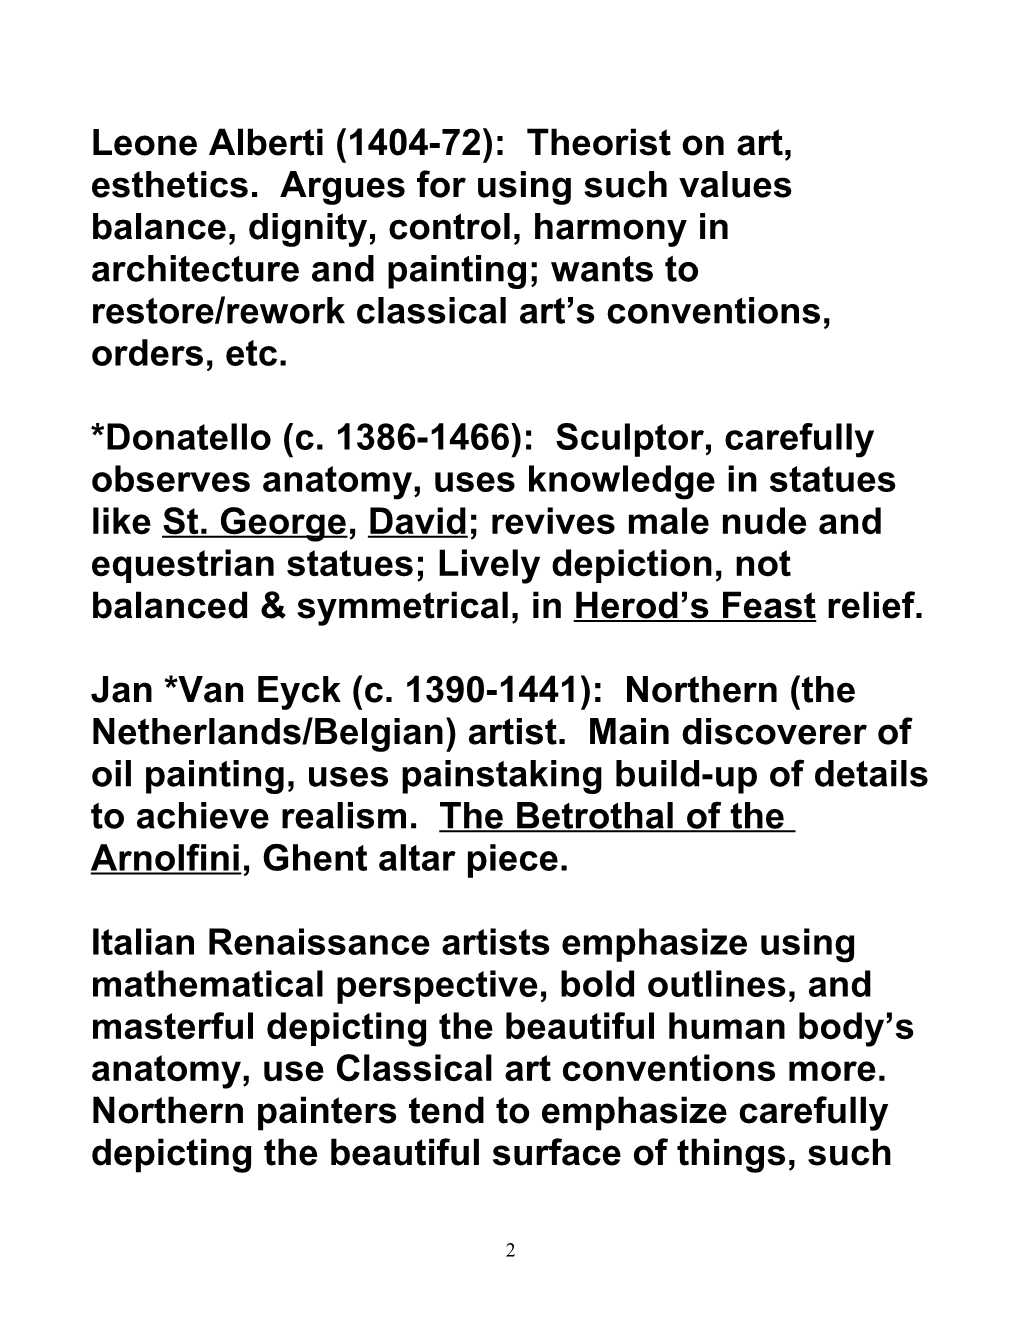 Renaissance, Mannerist, and Baroque Art and Architecture